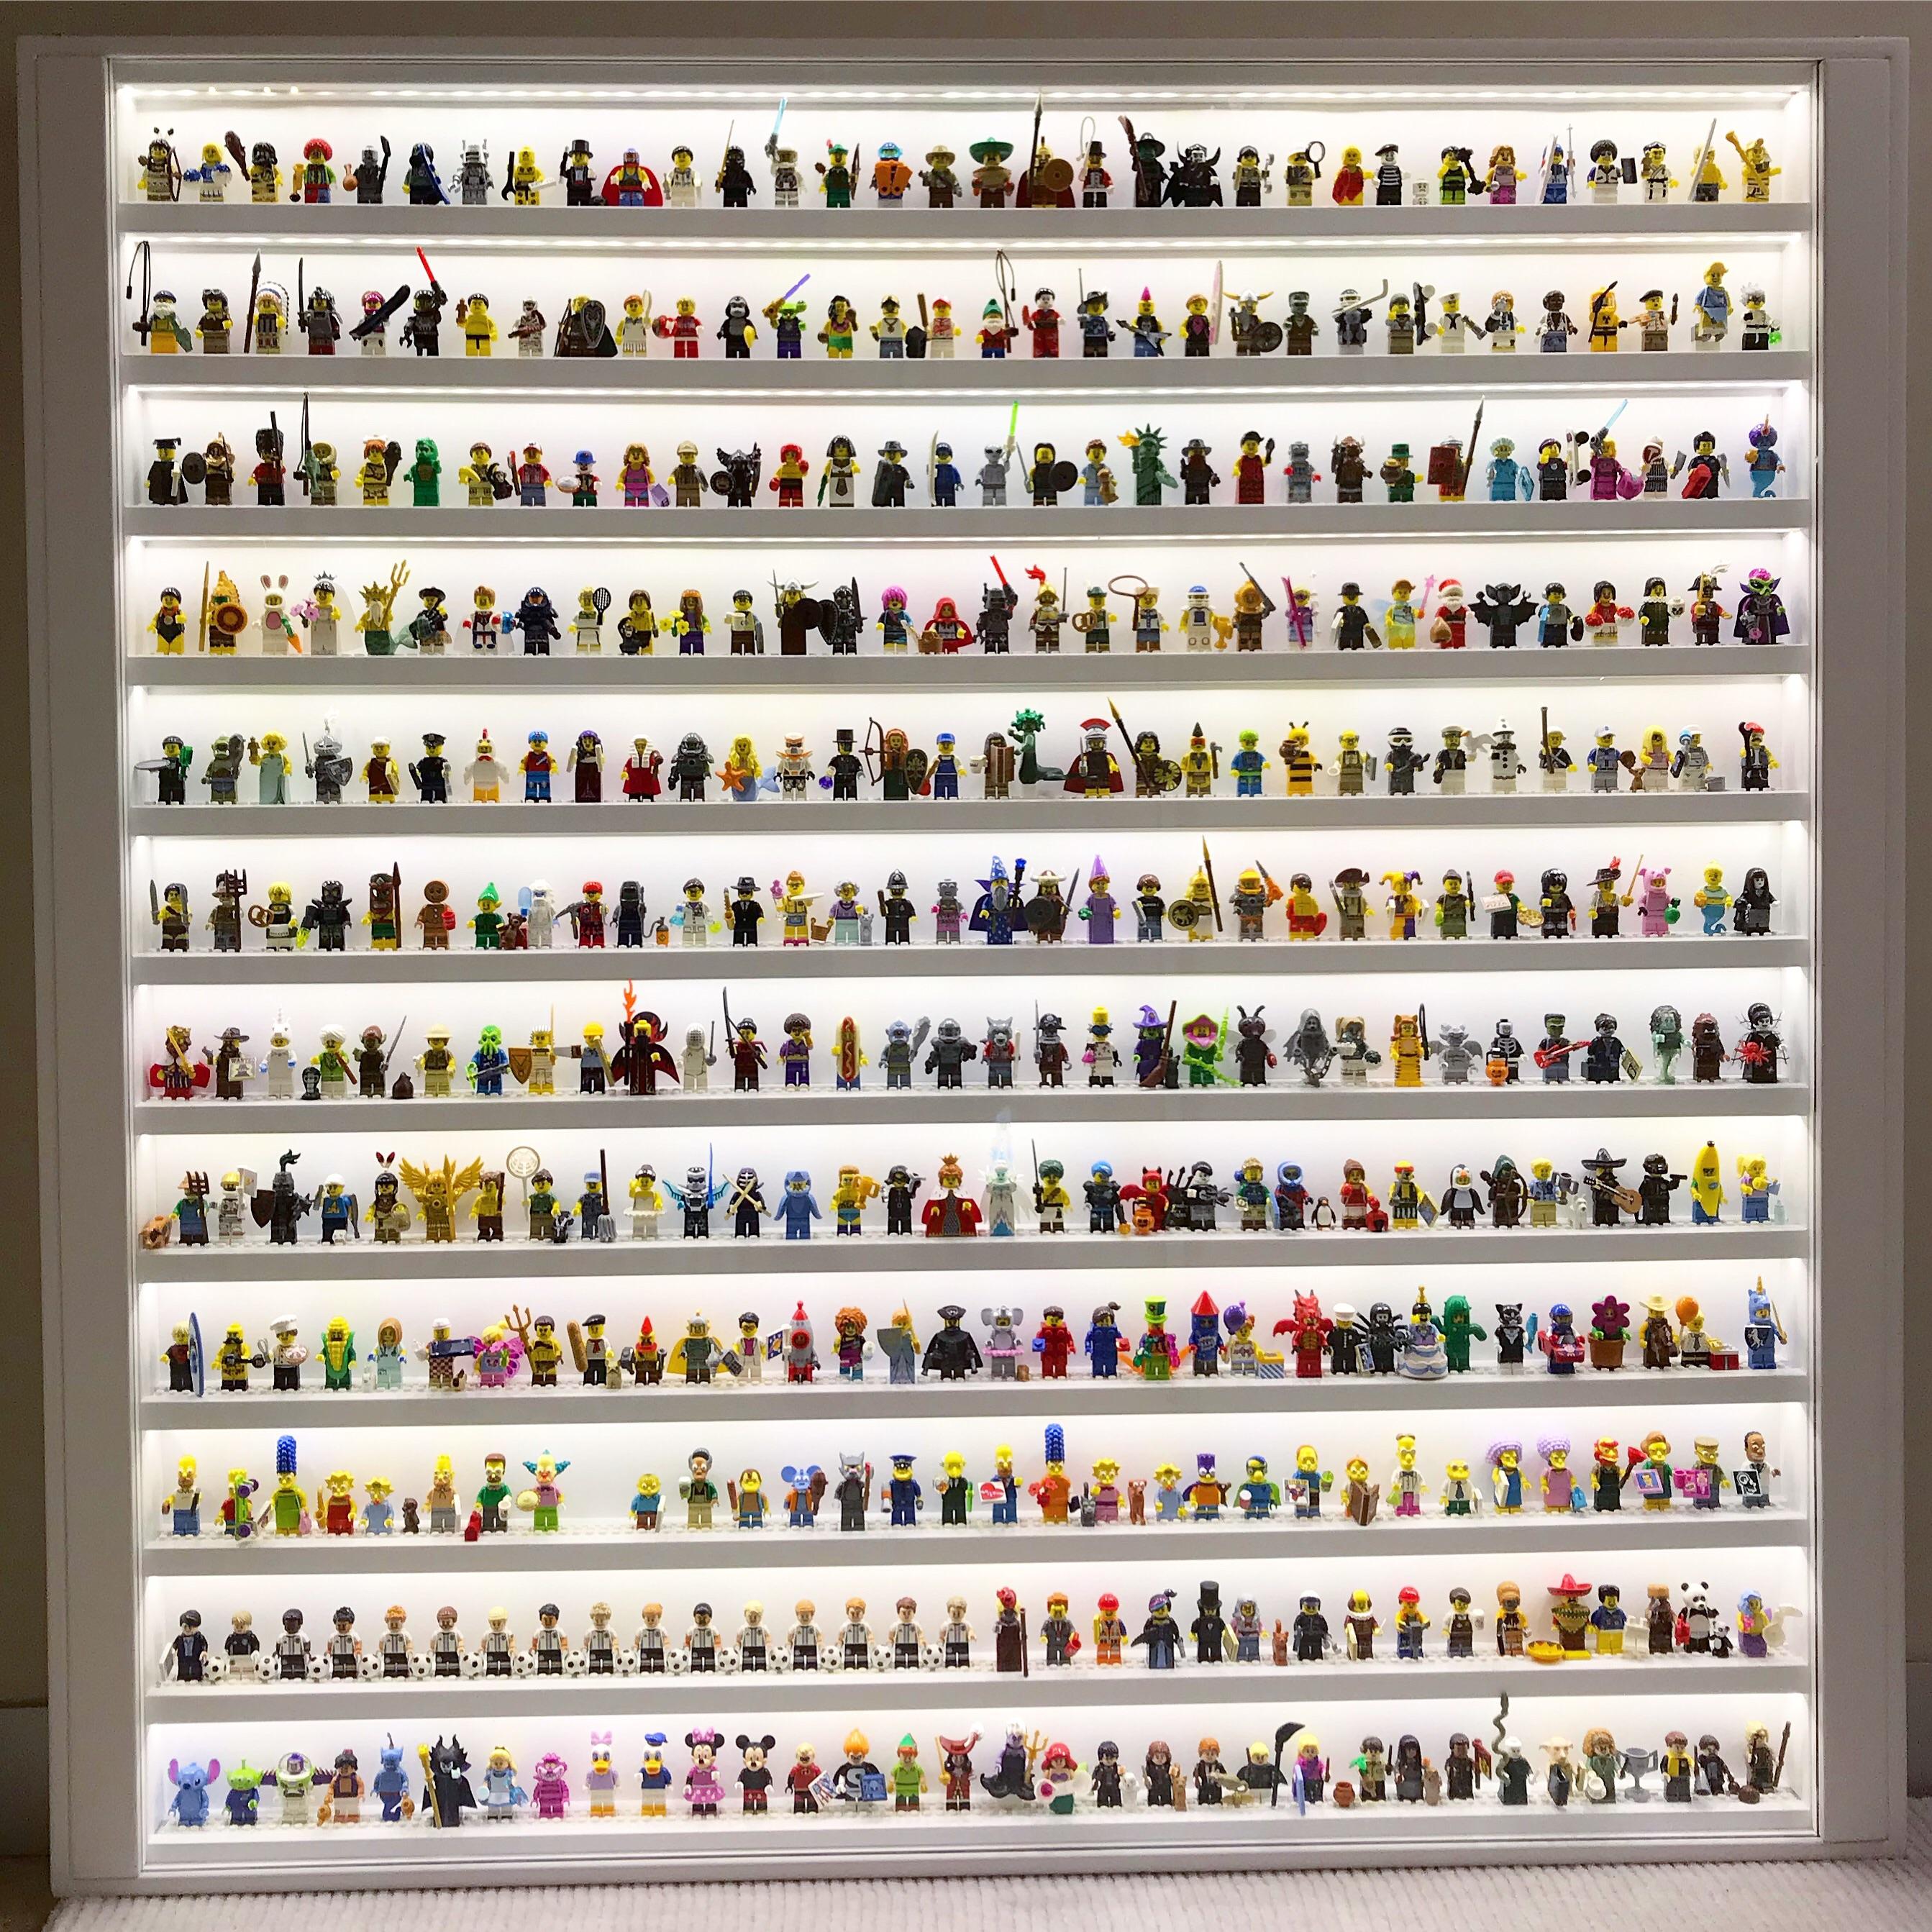 Lego Minecraft Sponge Bob Lord Of The Rings Minifigures Collectors Display Case